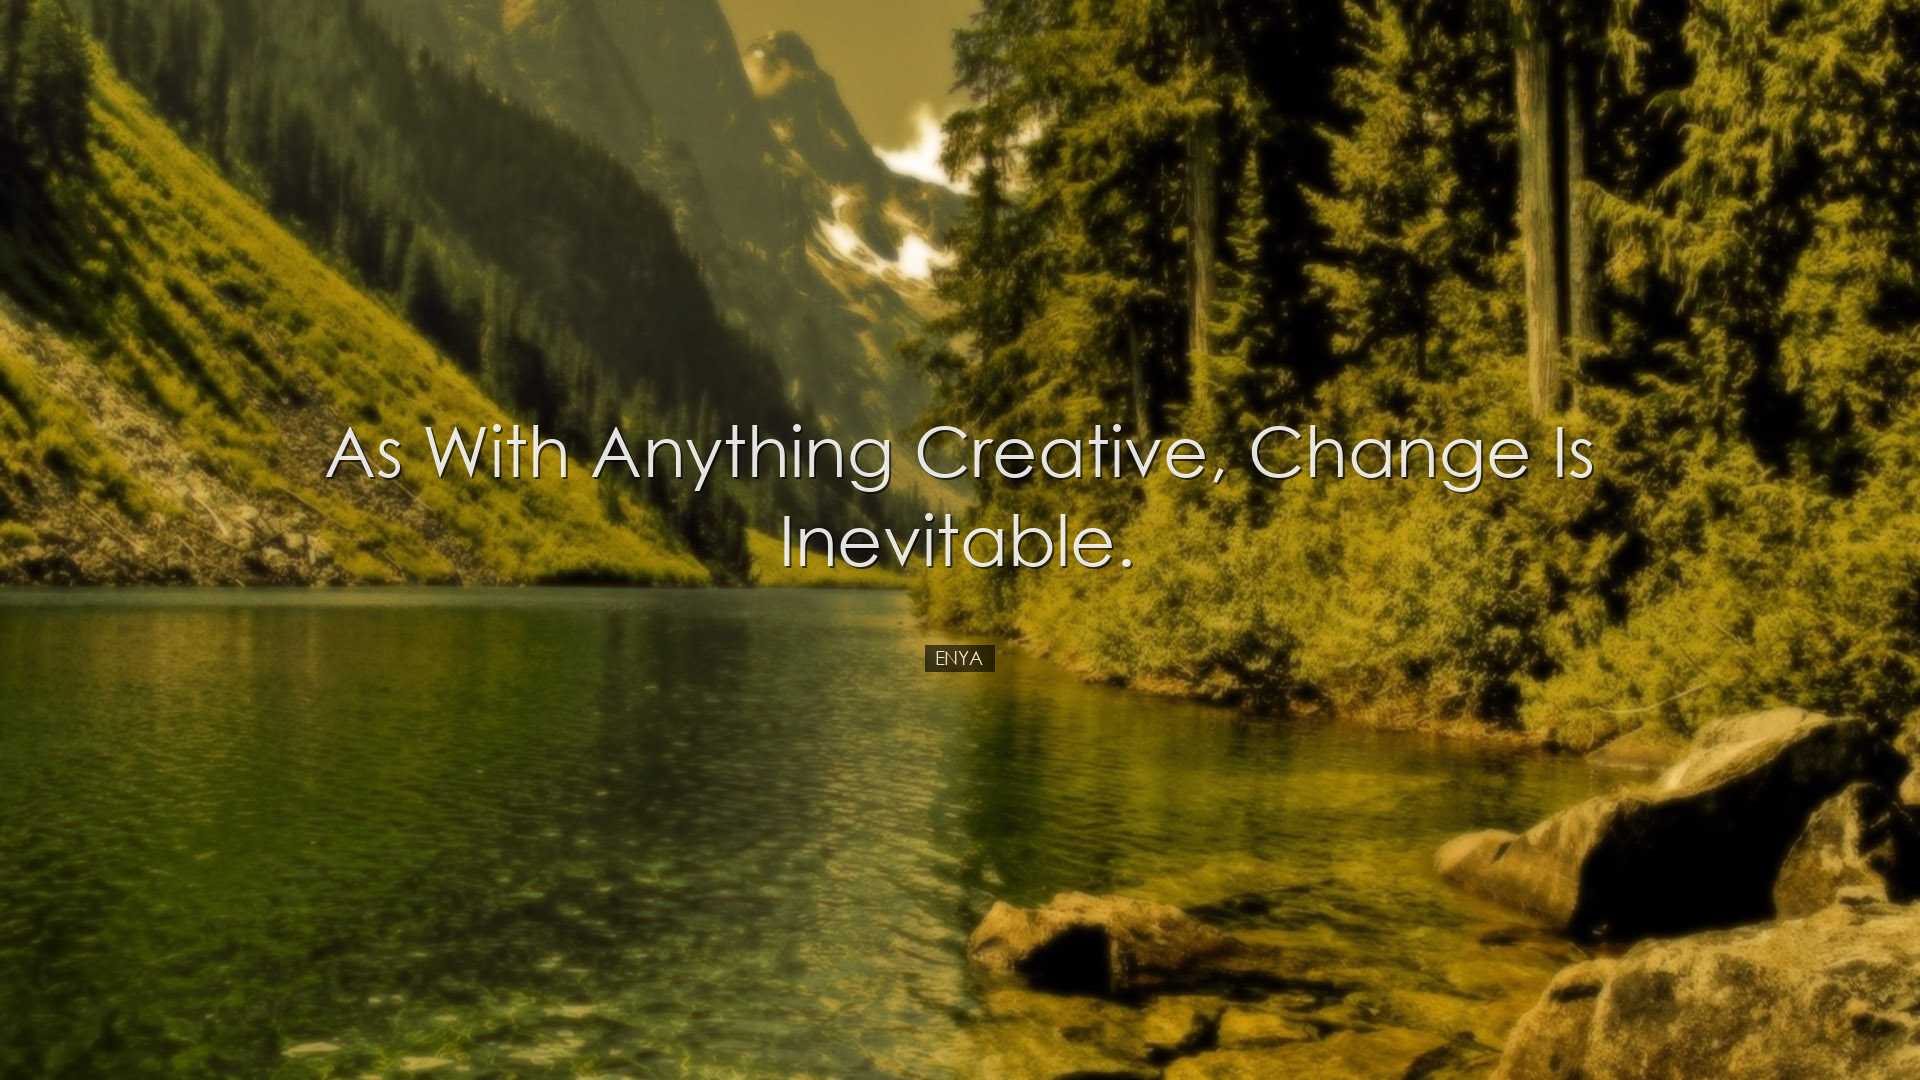 As with anything creative, change is inevitable. - Enya